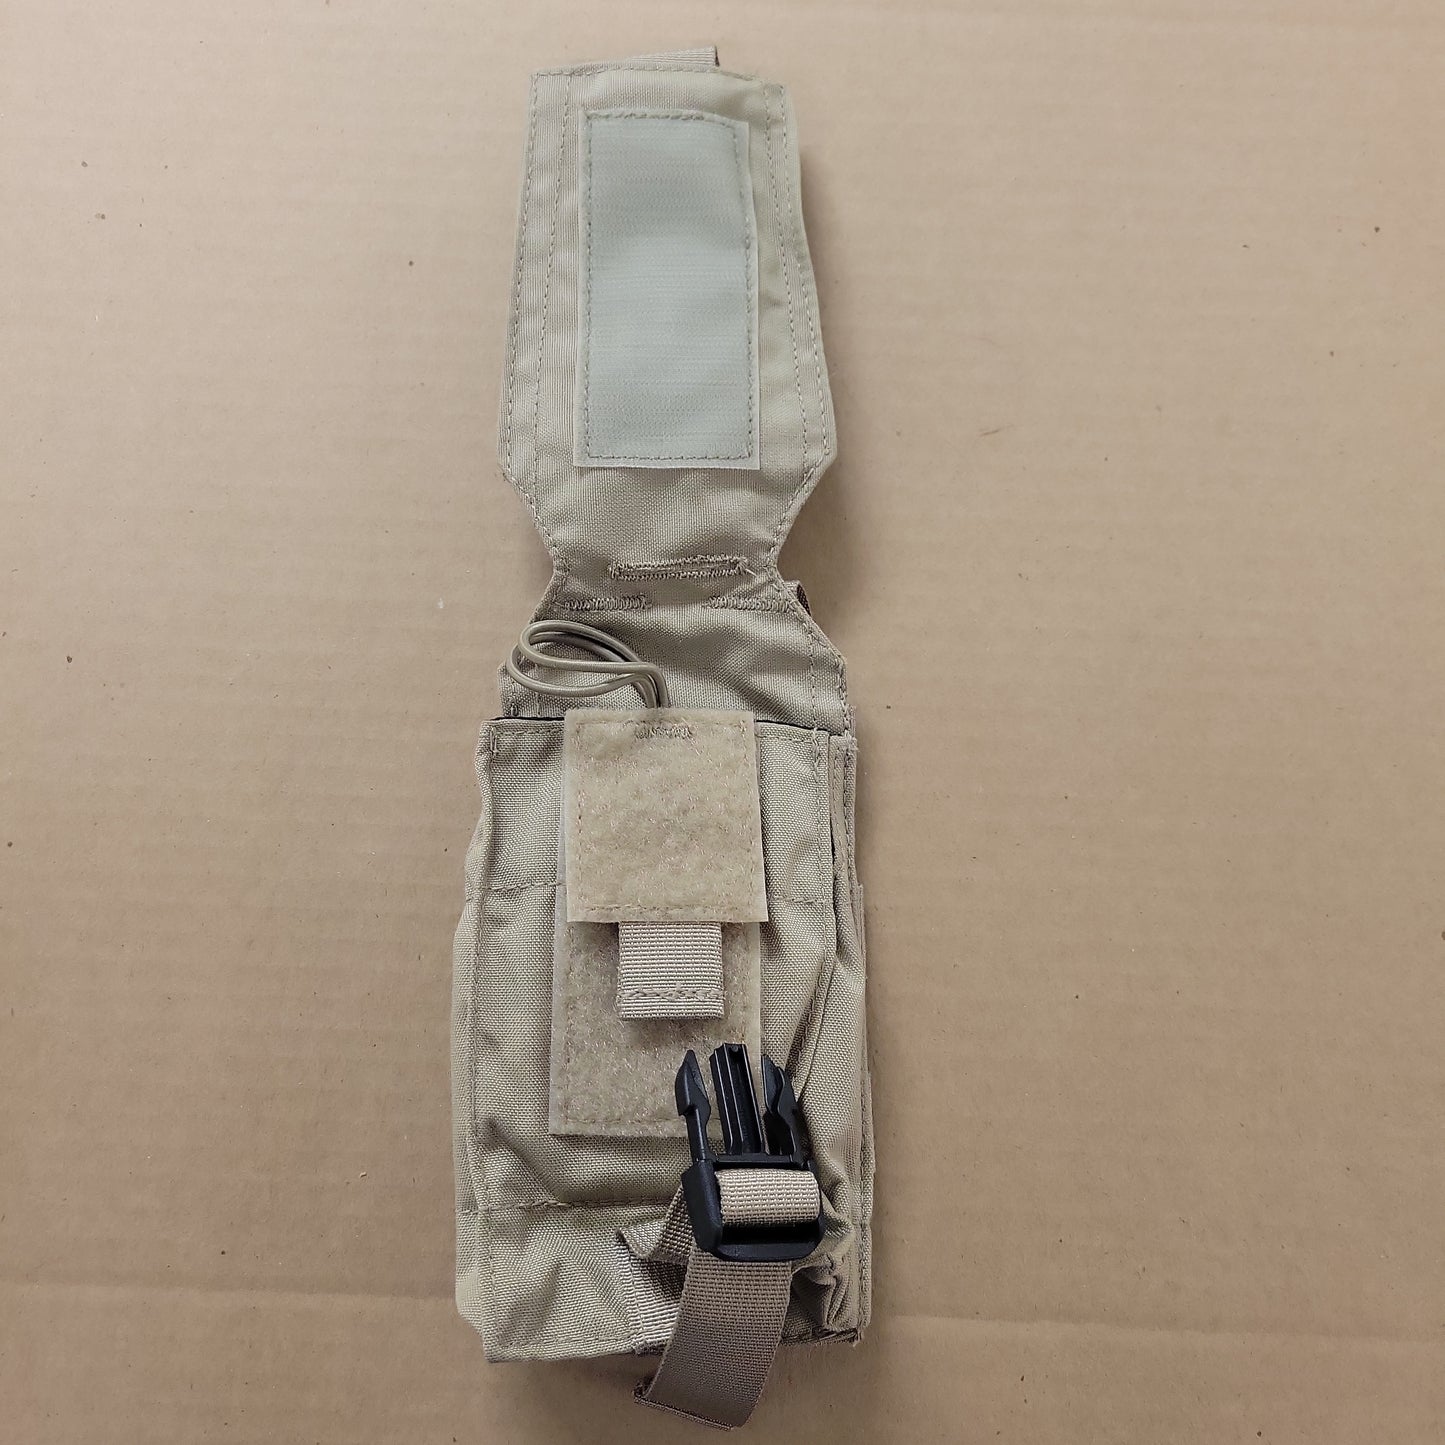 Safariland Tactical Pouch for Radio, Tan TP21-YT MOLLE